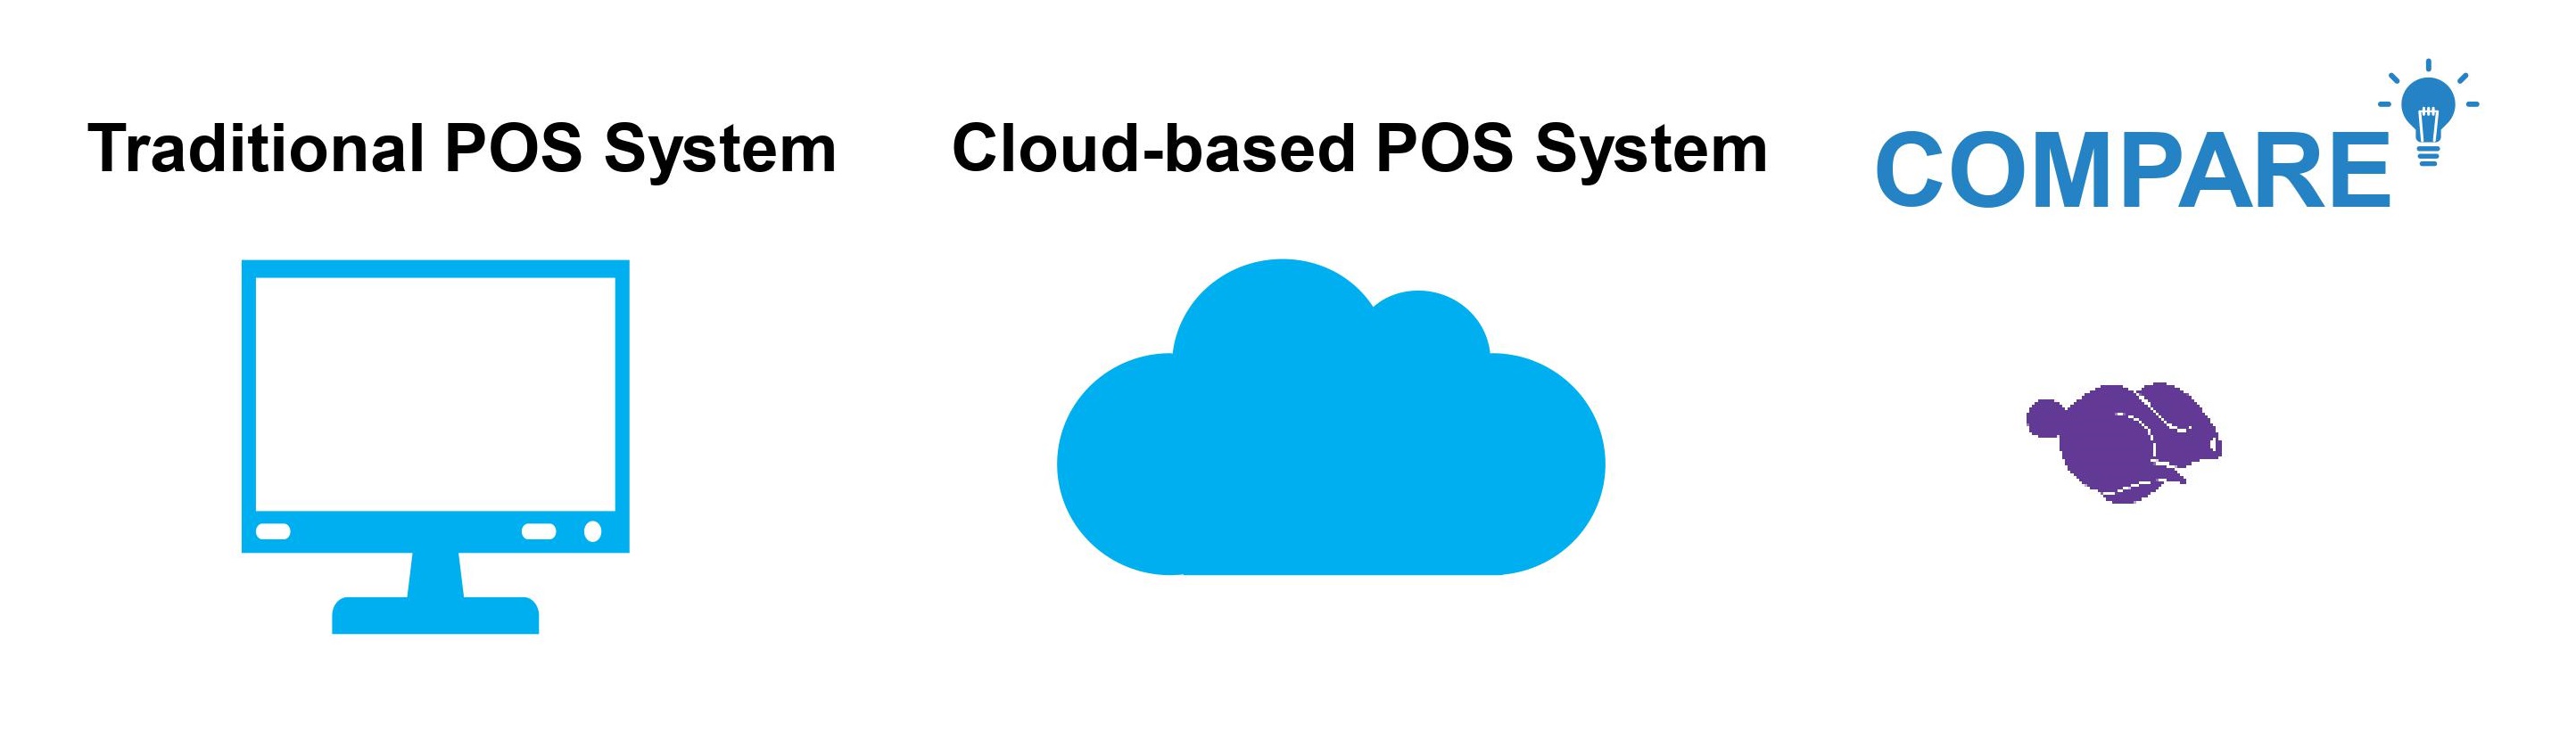 Compare Traditional POS and Cloud-Based POS